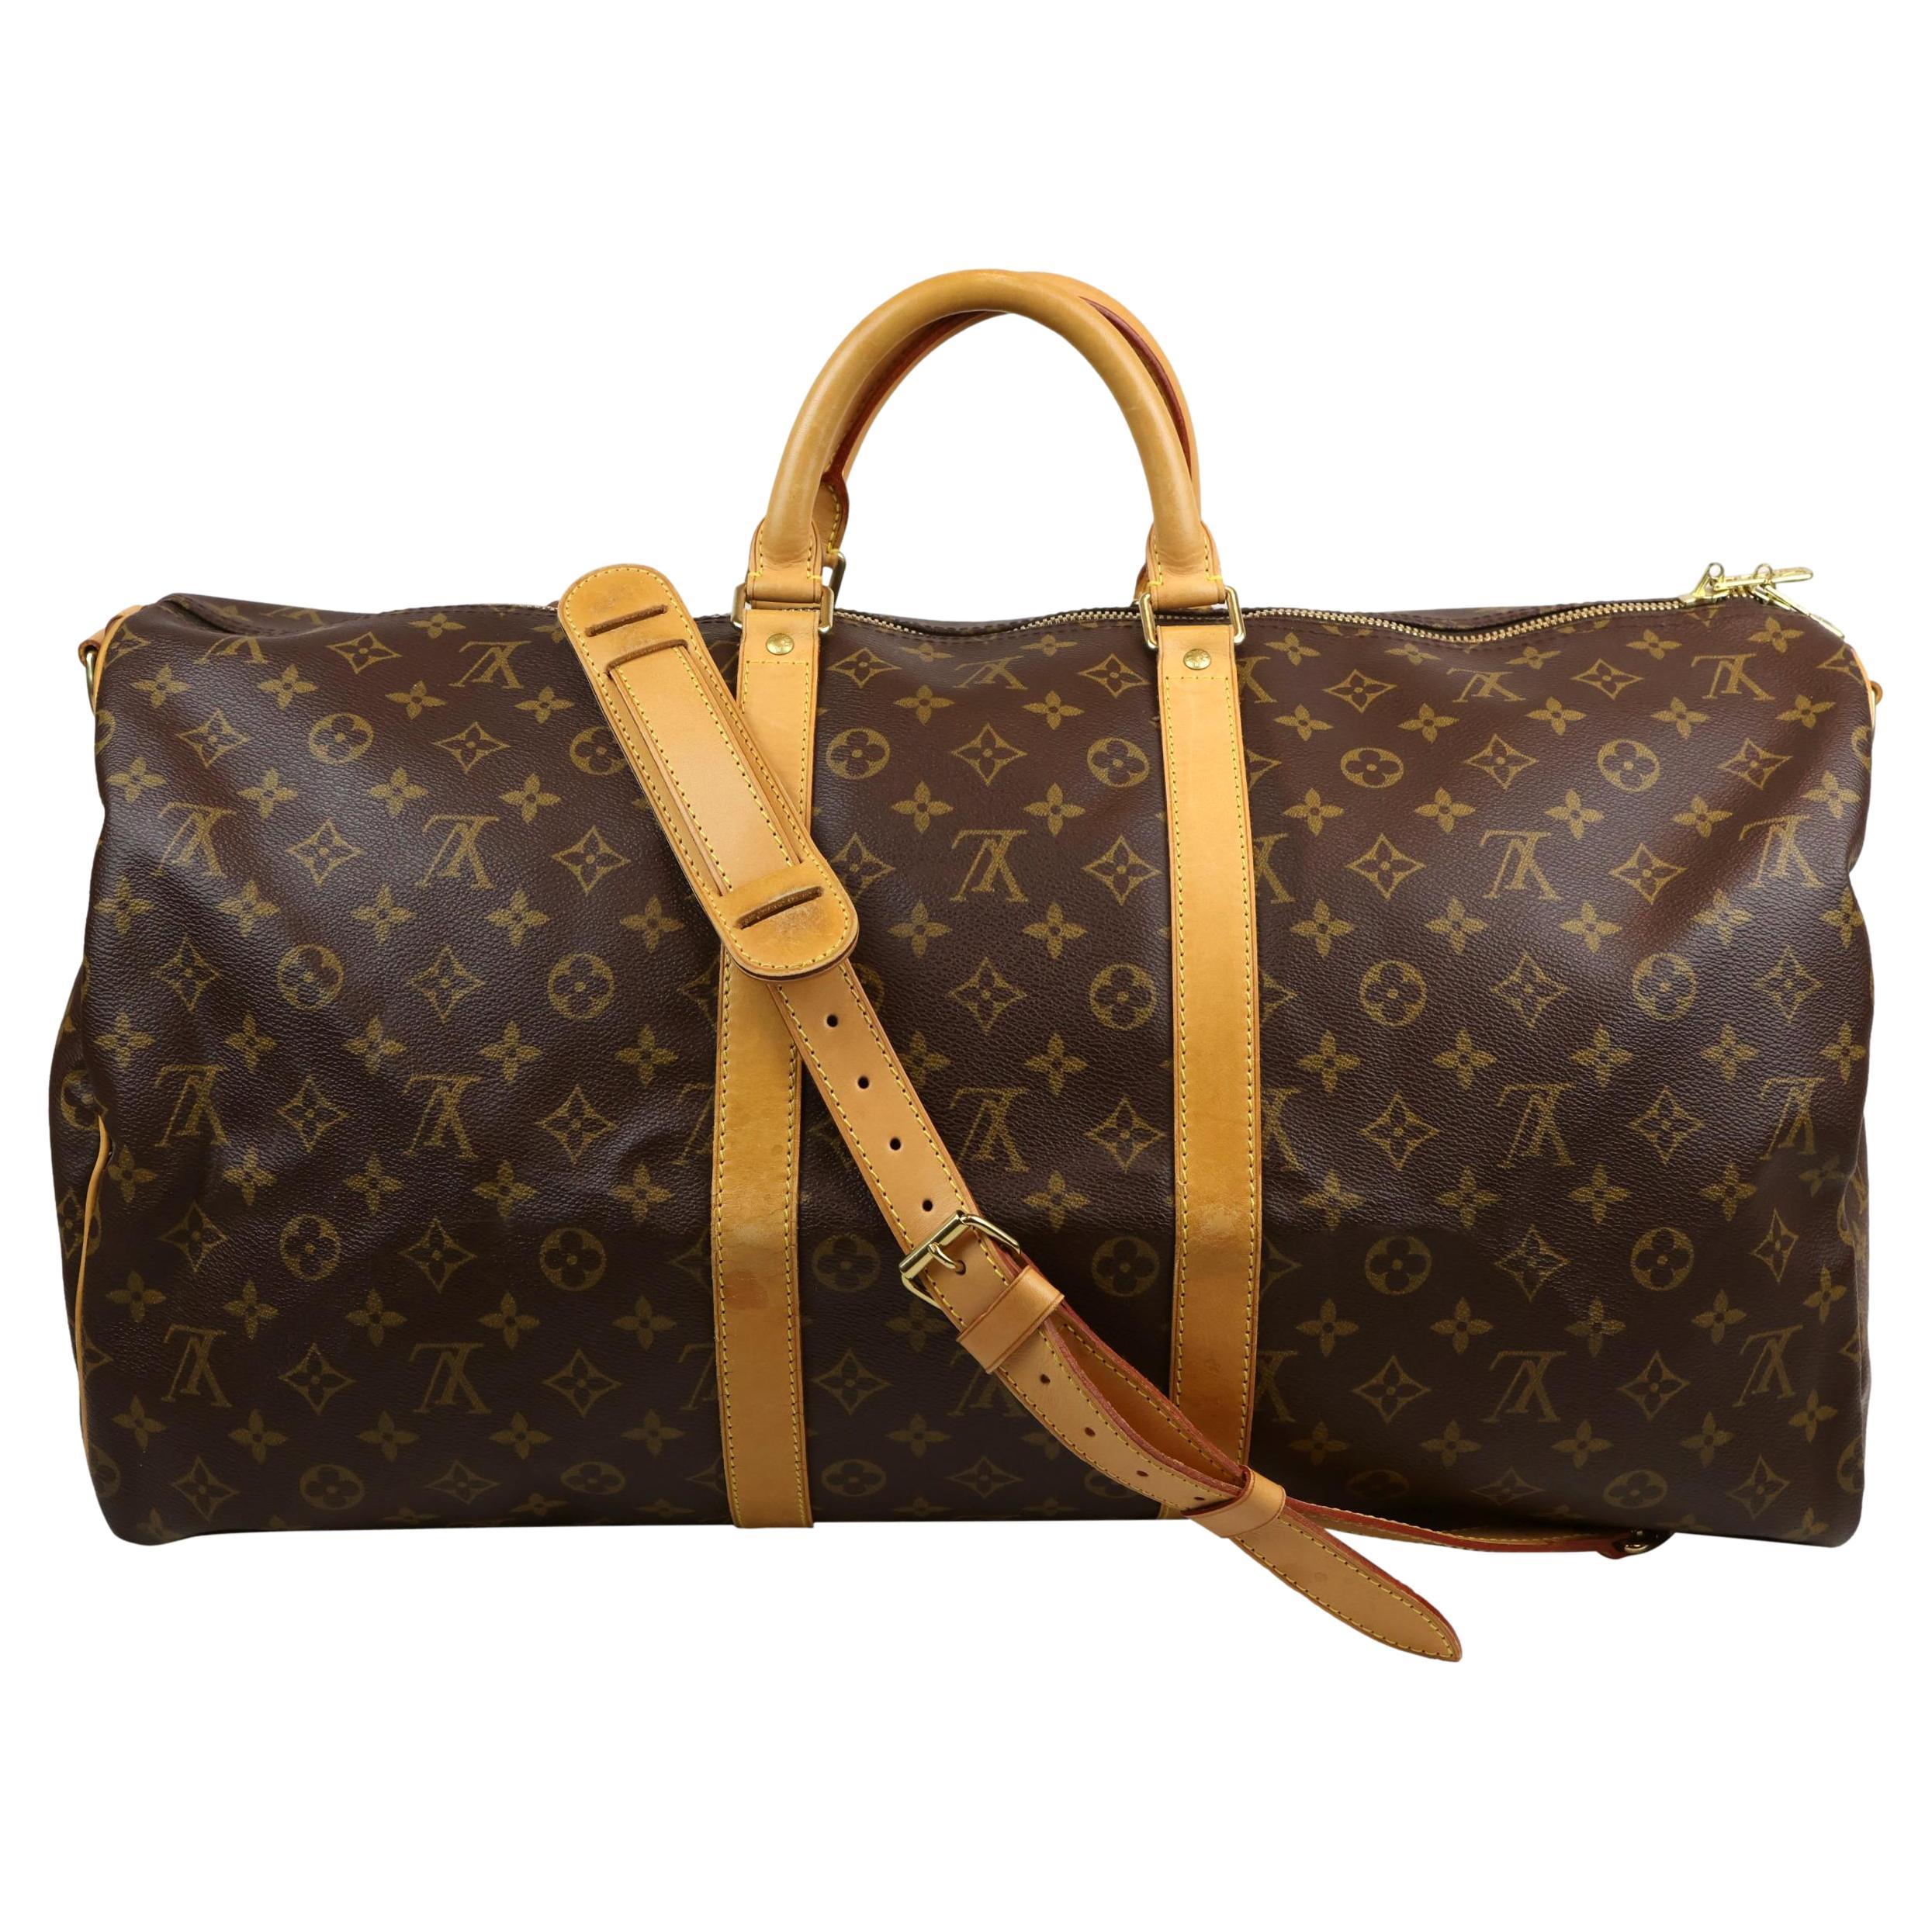 Louis Vuitton Grey Taiga Leather Neo Kendall Travel Bag For Sale at 1stDibs